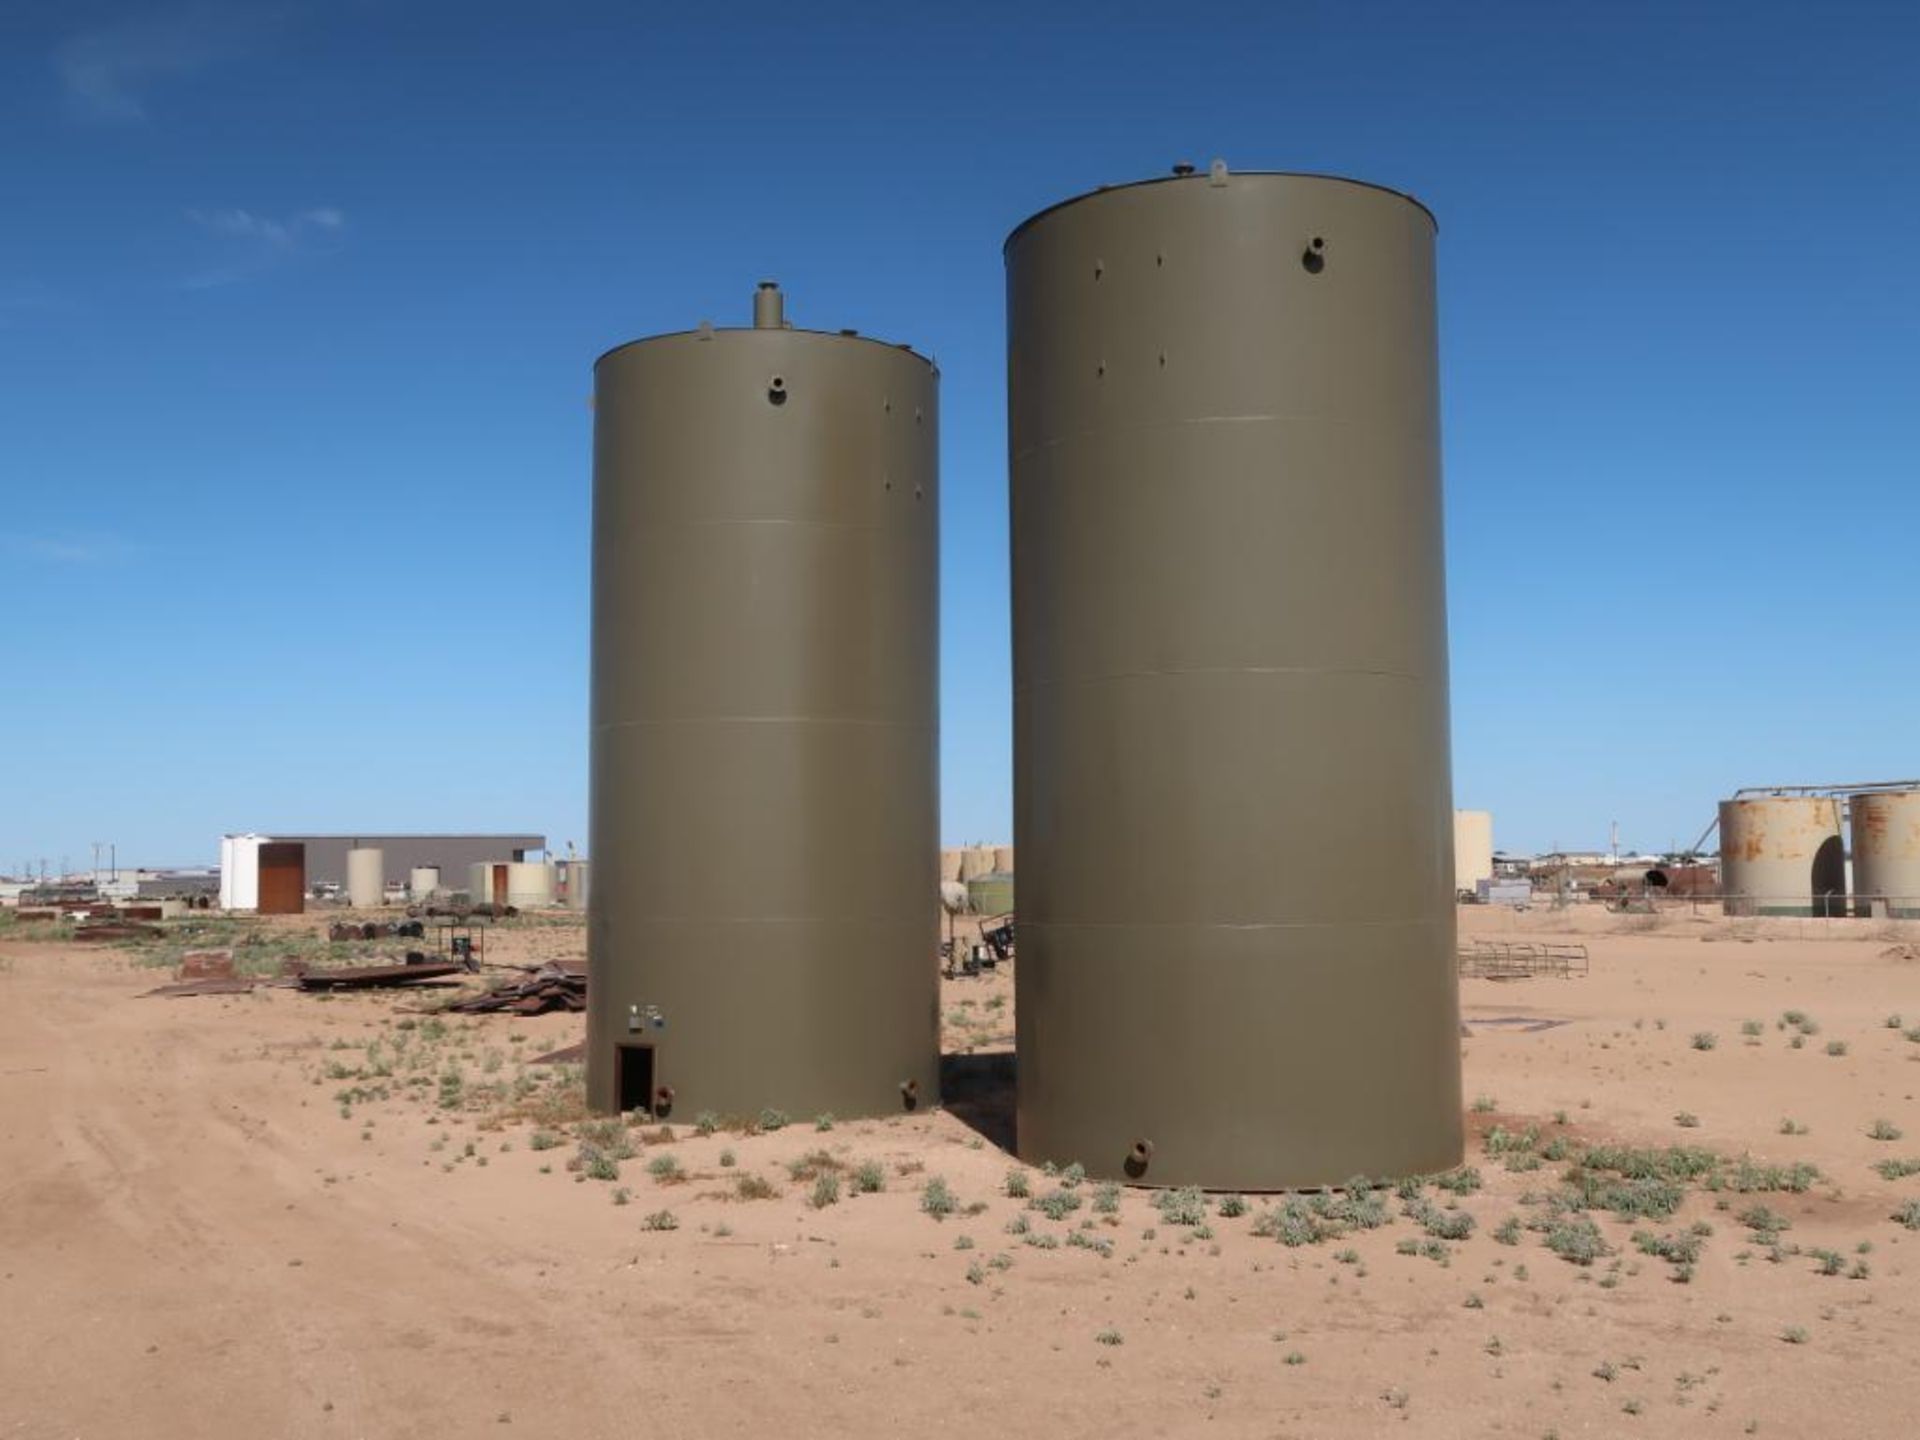 (6) LARGE STEEL TANKS - (2) 1000 BBL, (2) 750 BBL, AND (2) NEW 1000 BBL